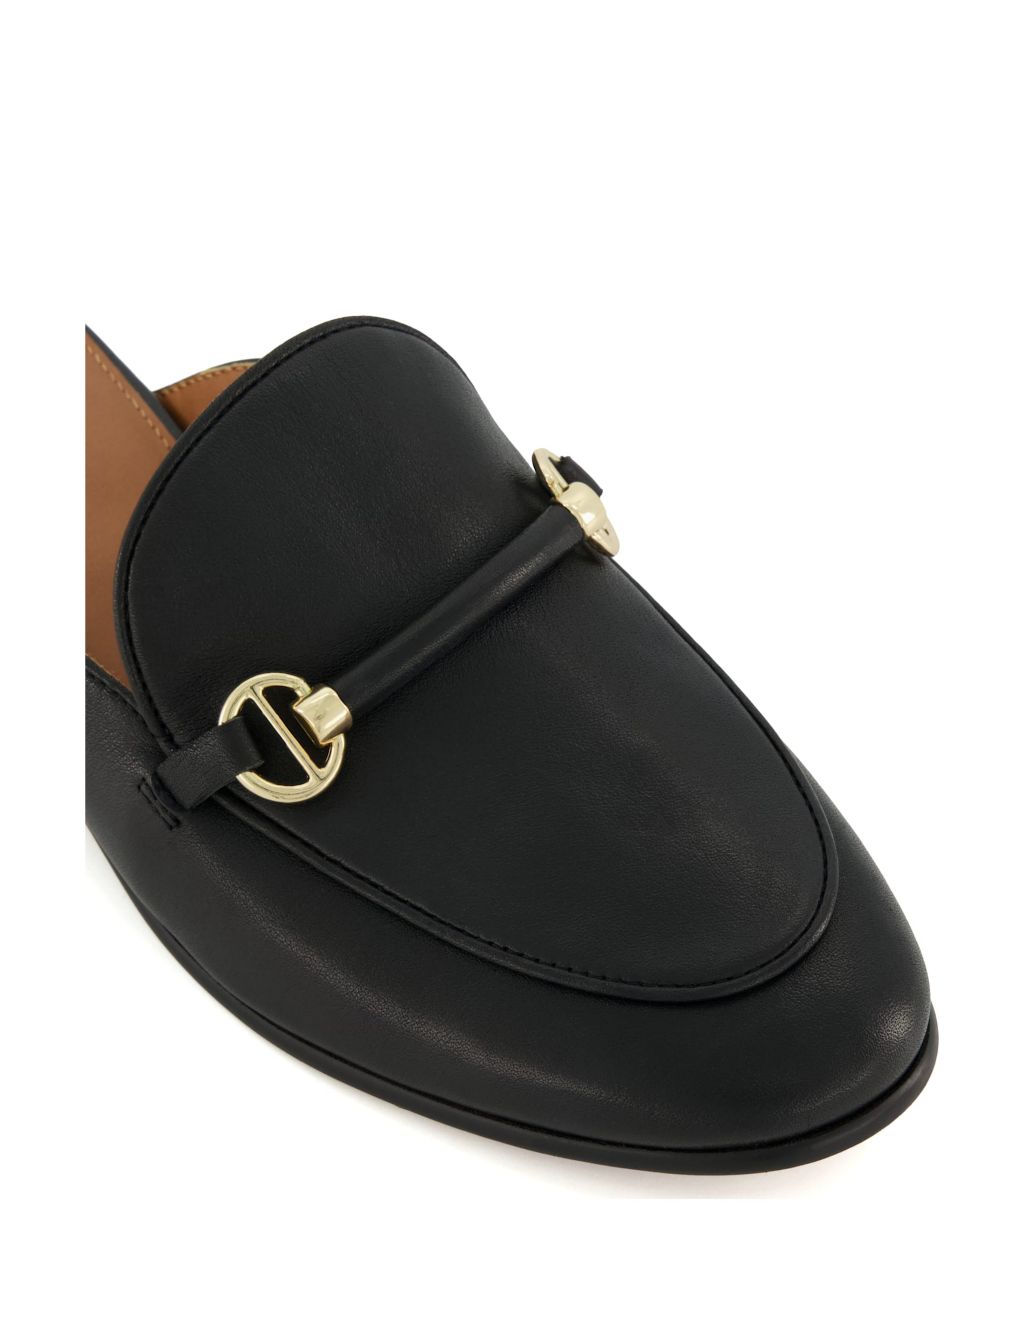 Leather Ring Detail Flat Loafers image 3